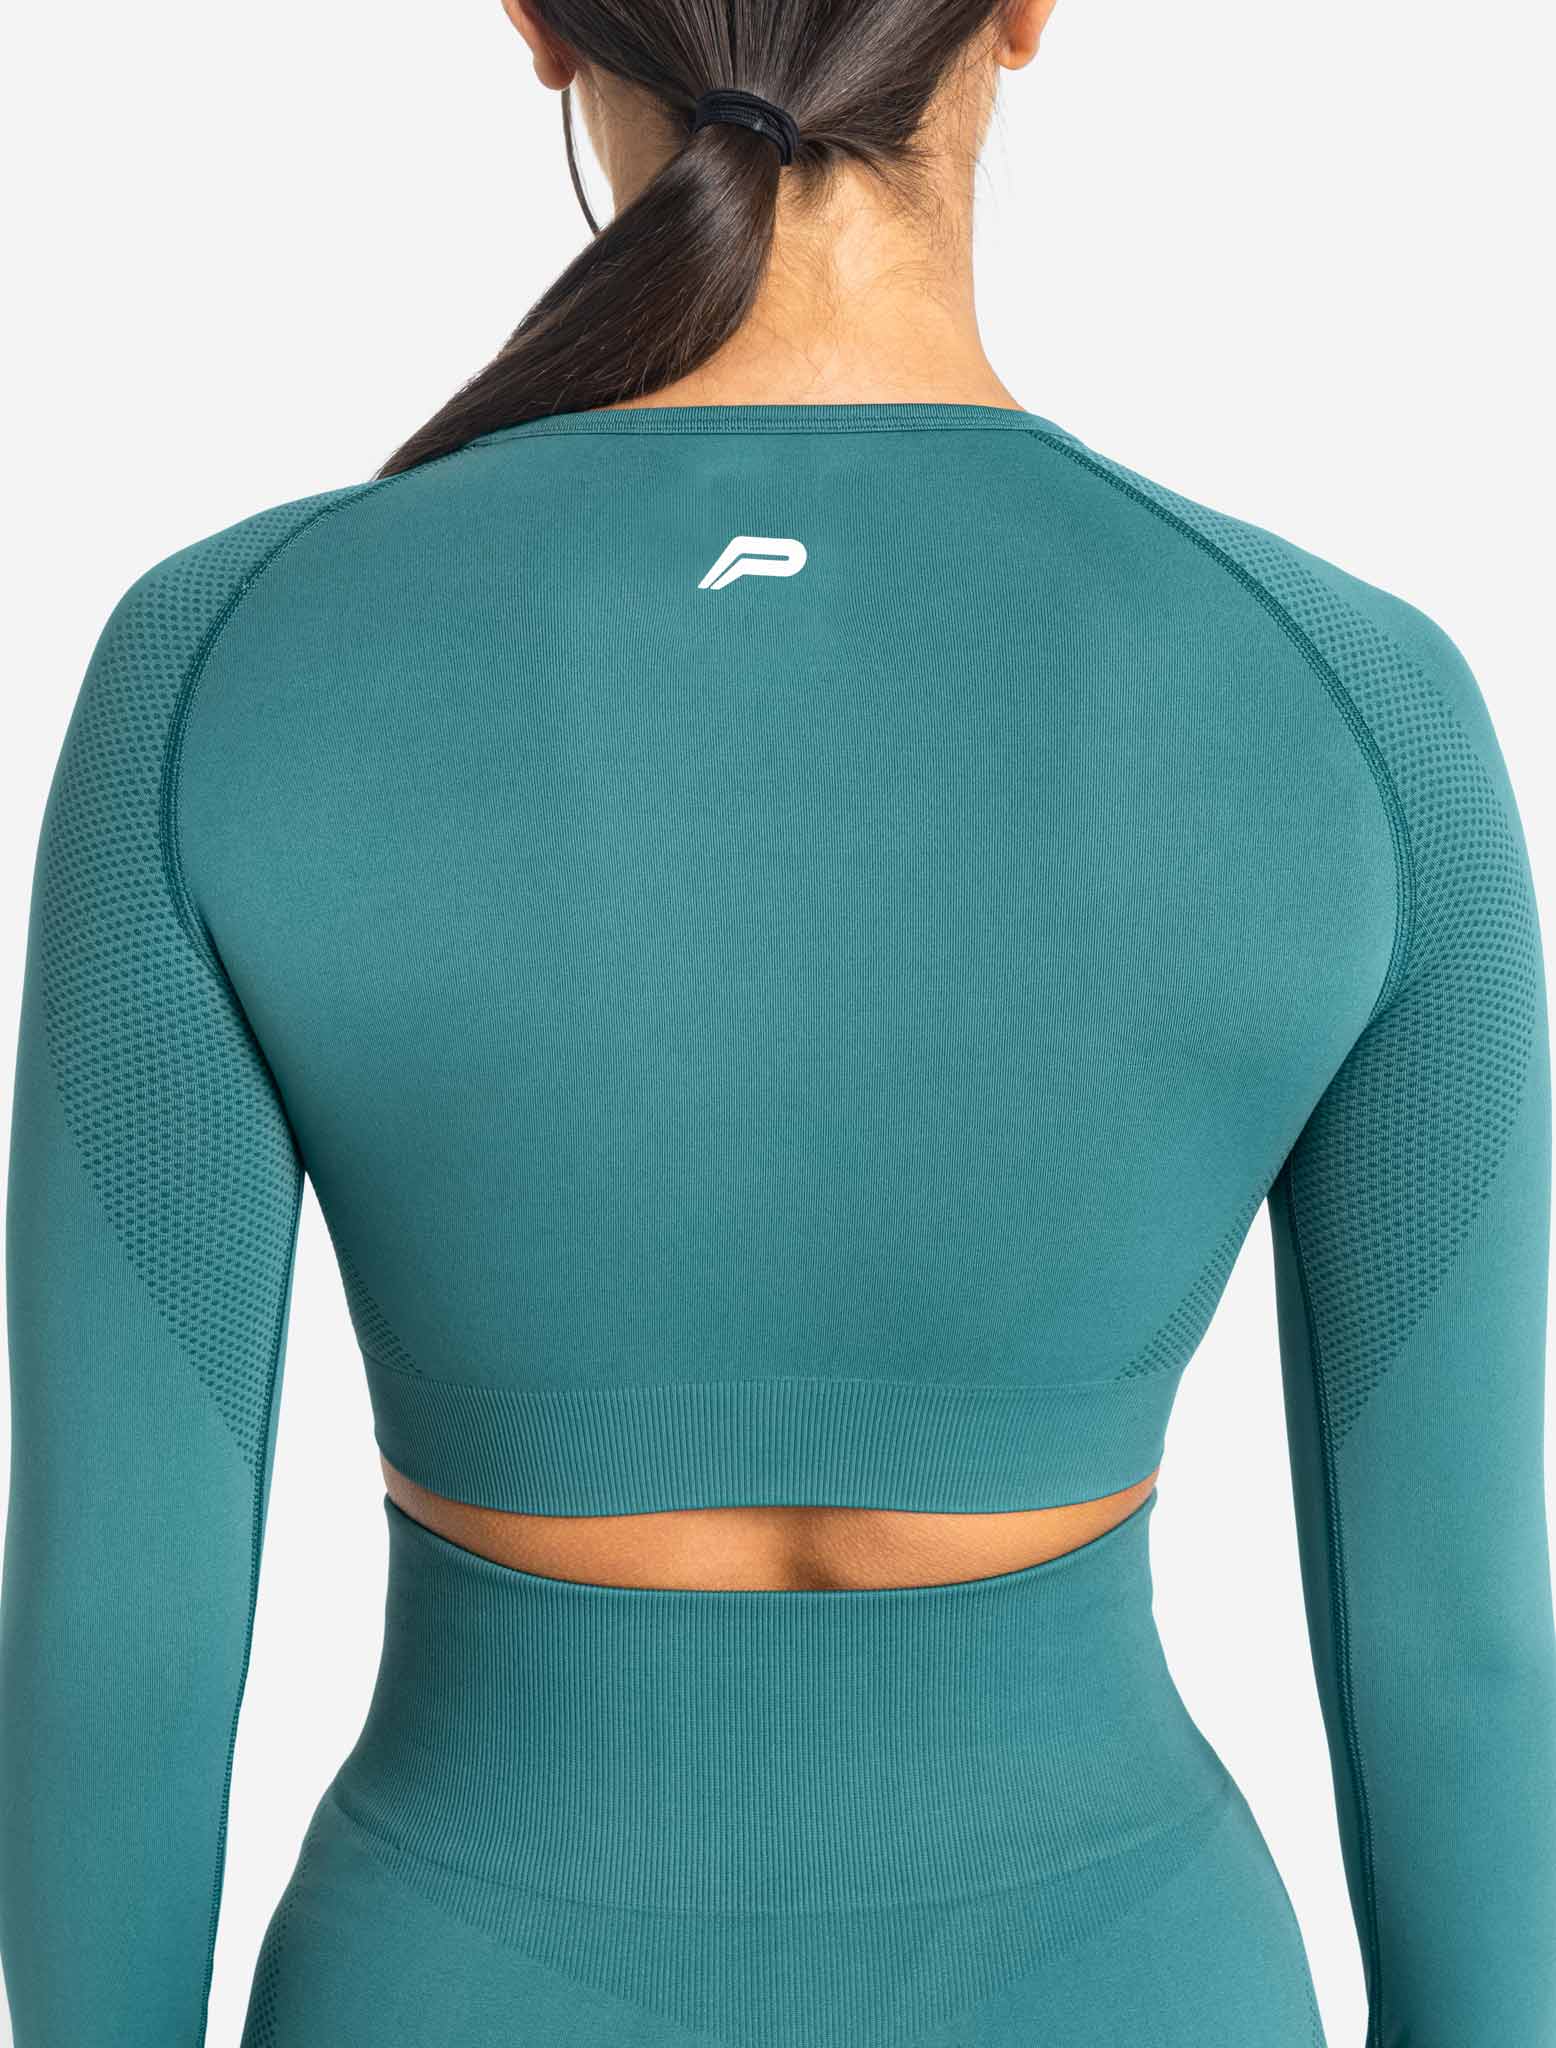 Move Seamless Long Sleeve Crop Top / Teal Pursue Fitness 5